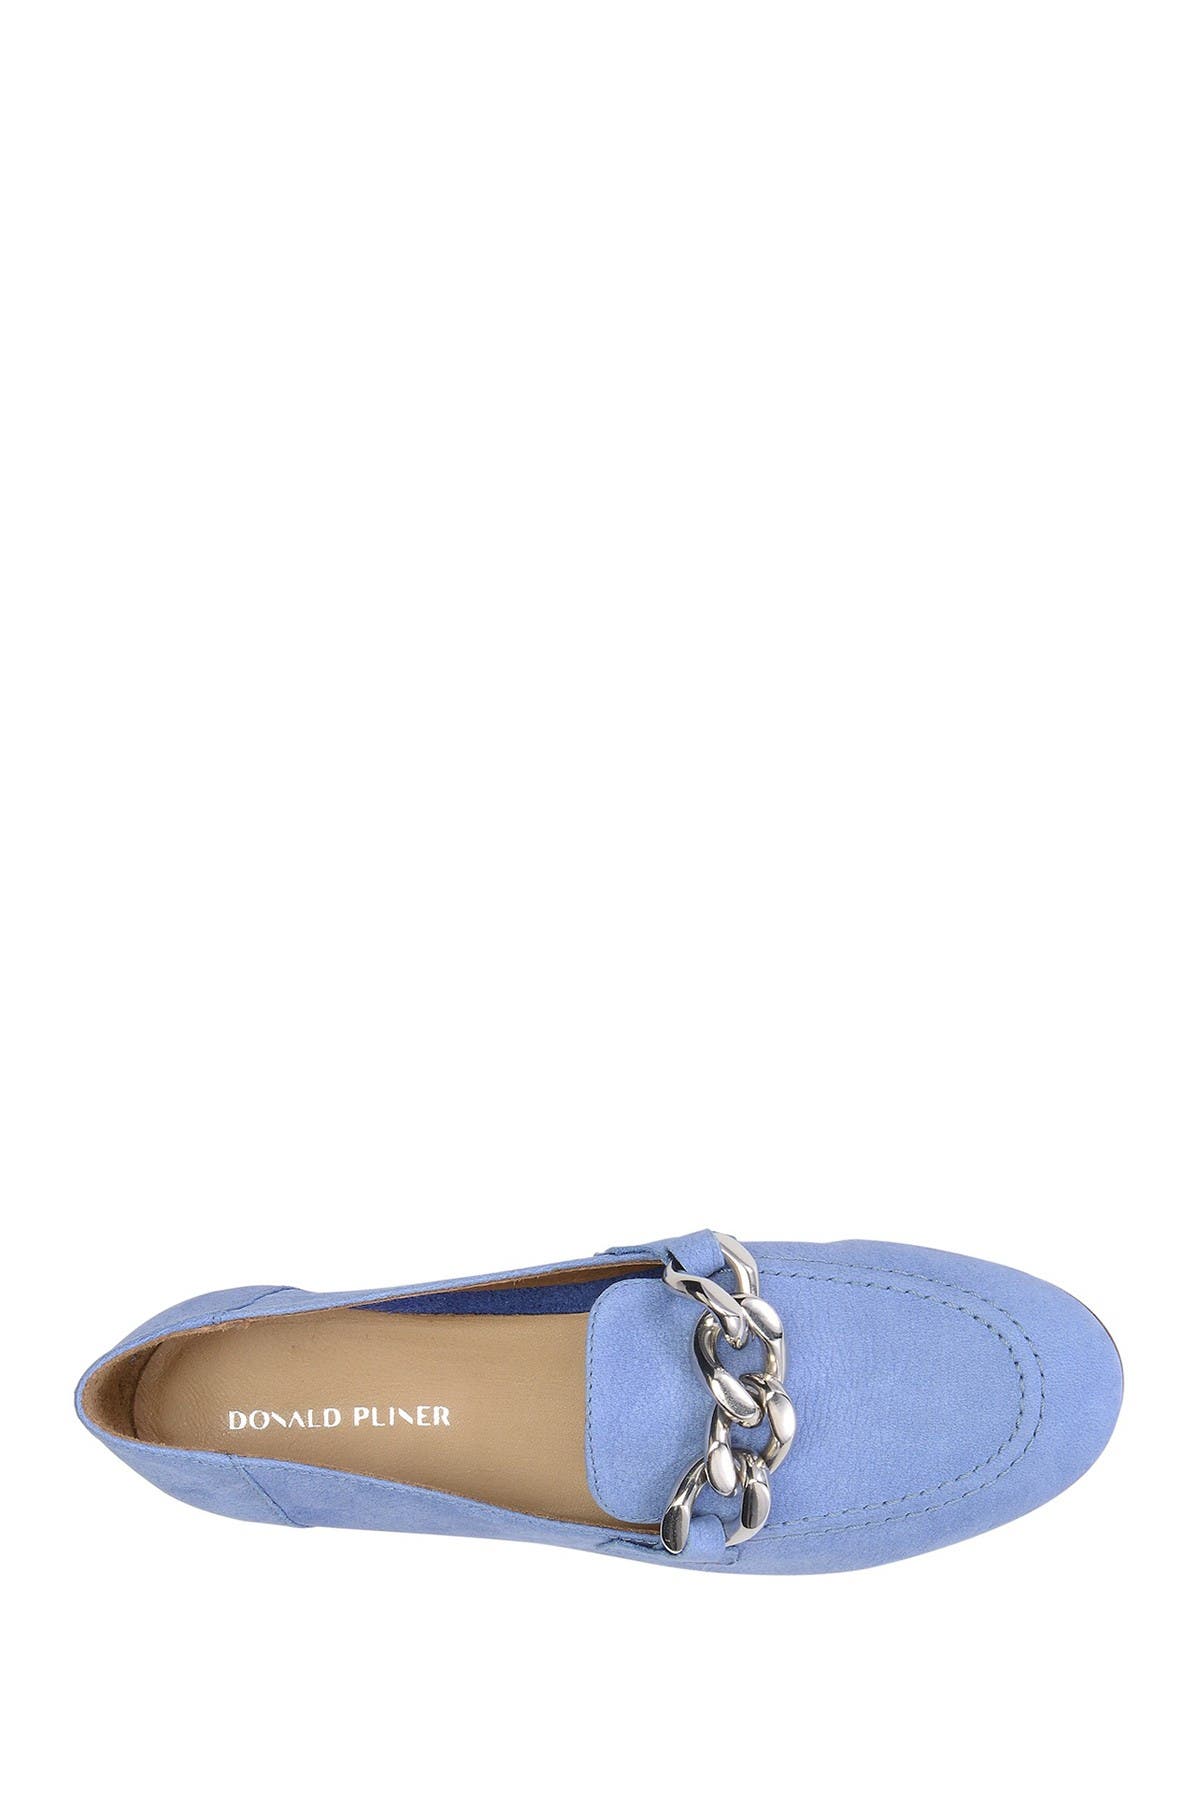 Donald Pliner Nolin Suede Leather Loafer In Turquoise/aqua